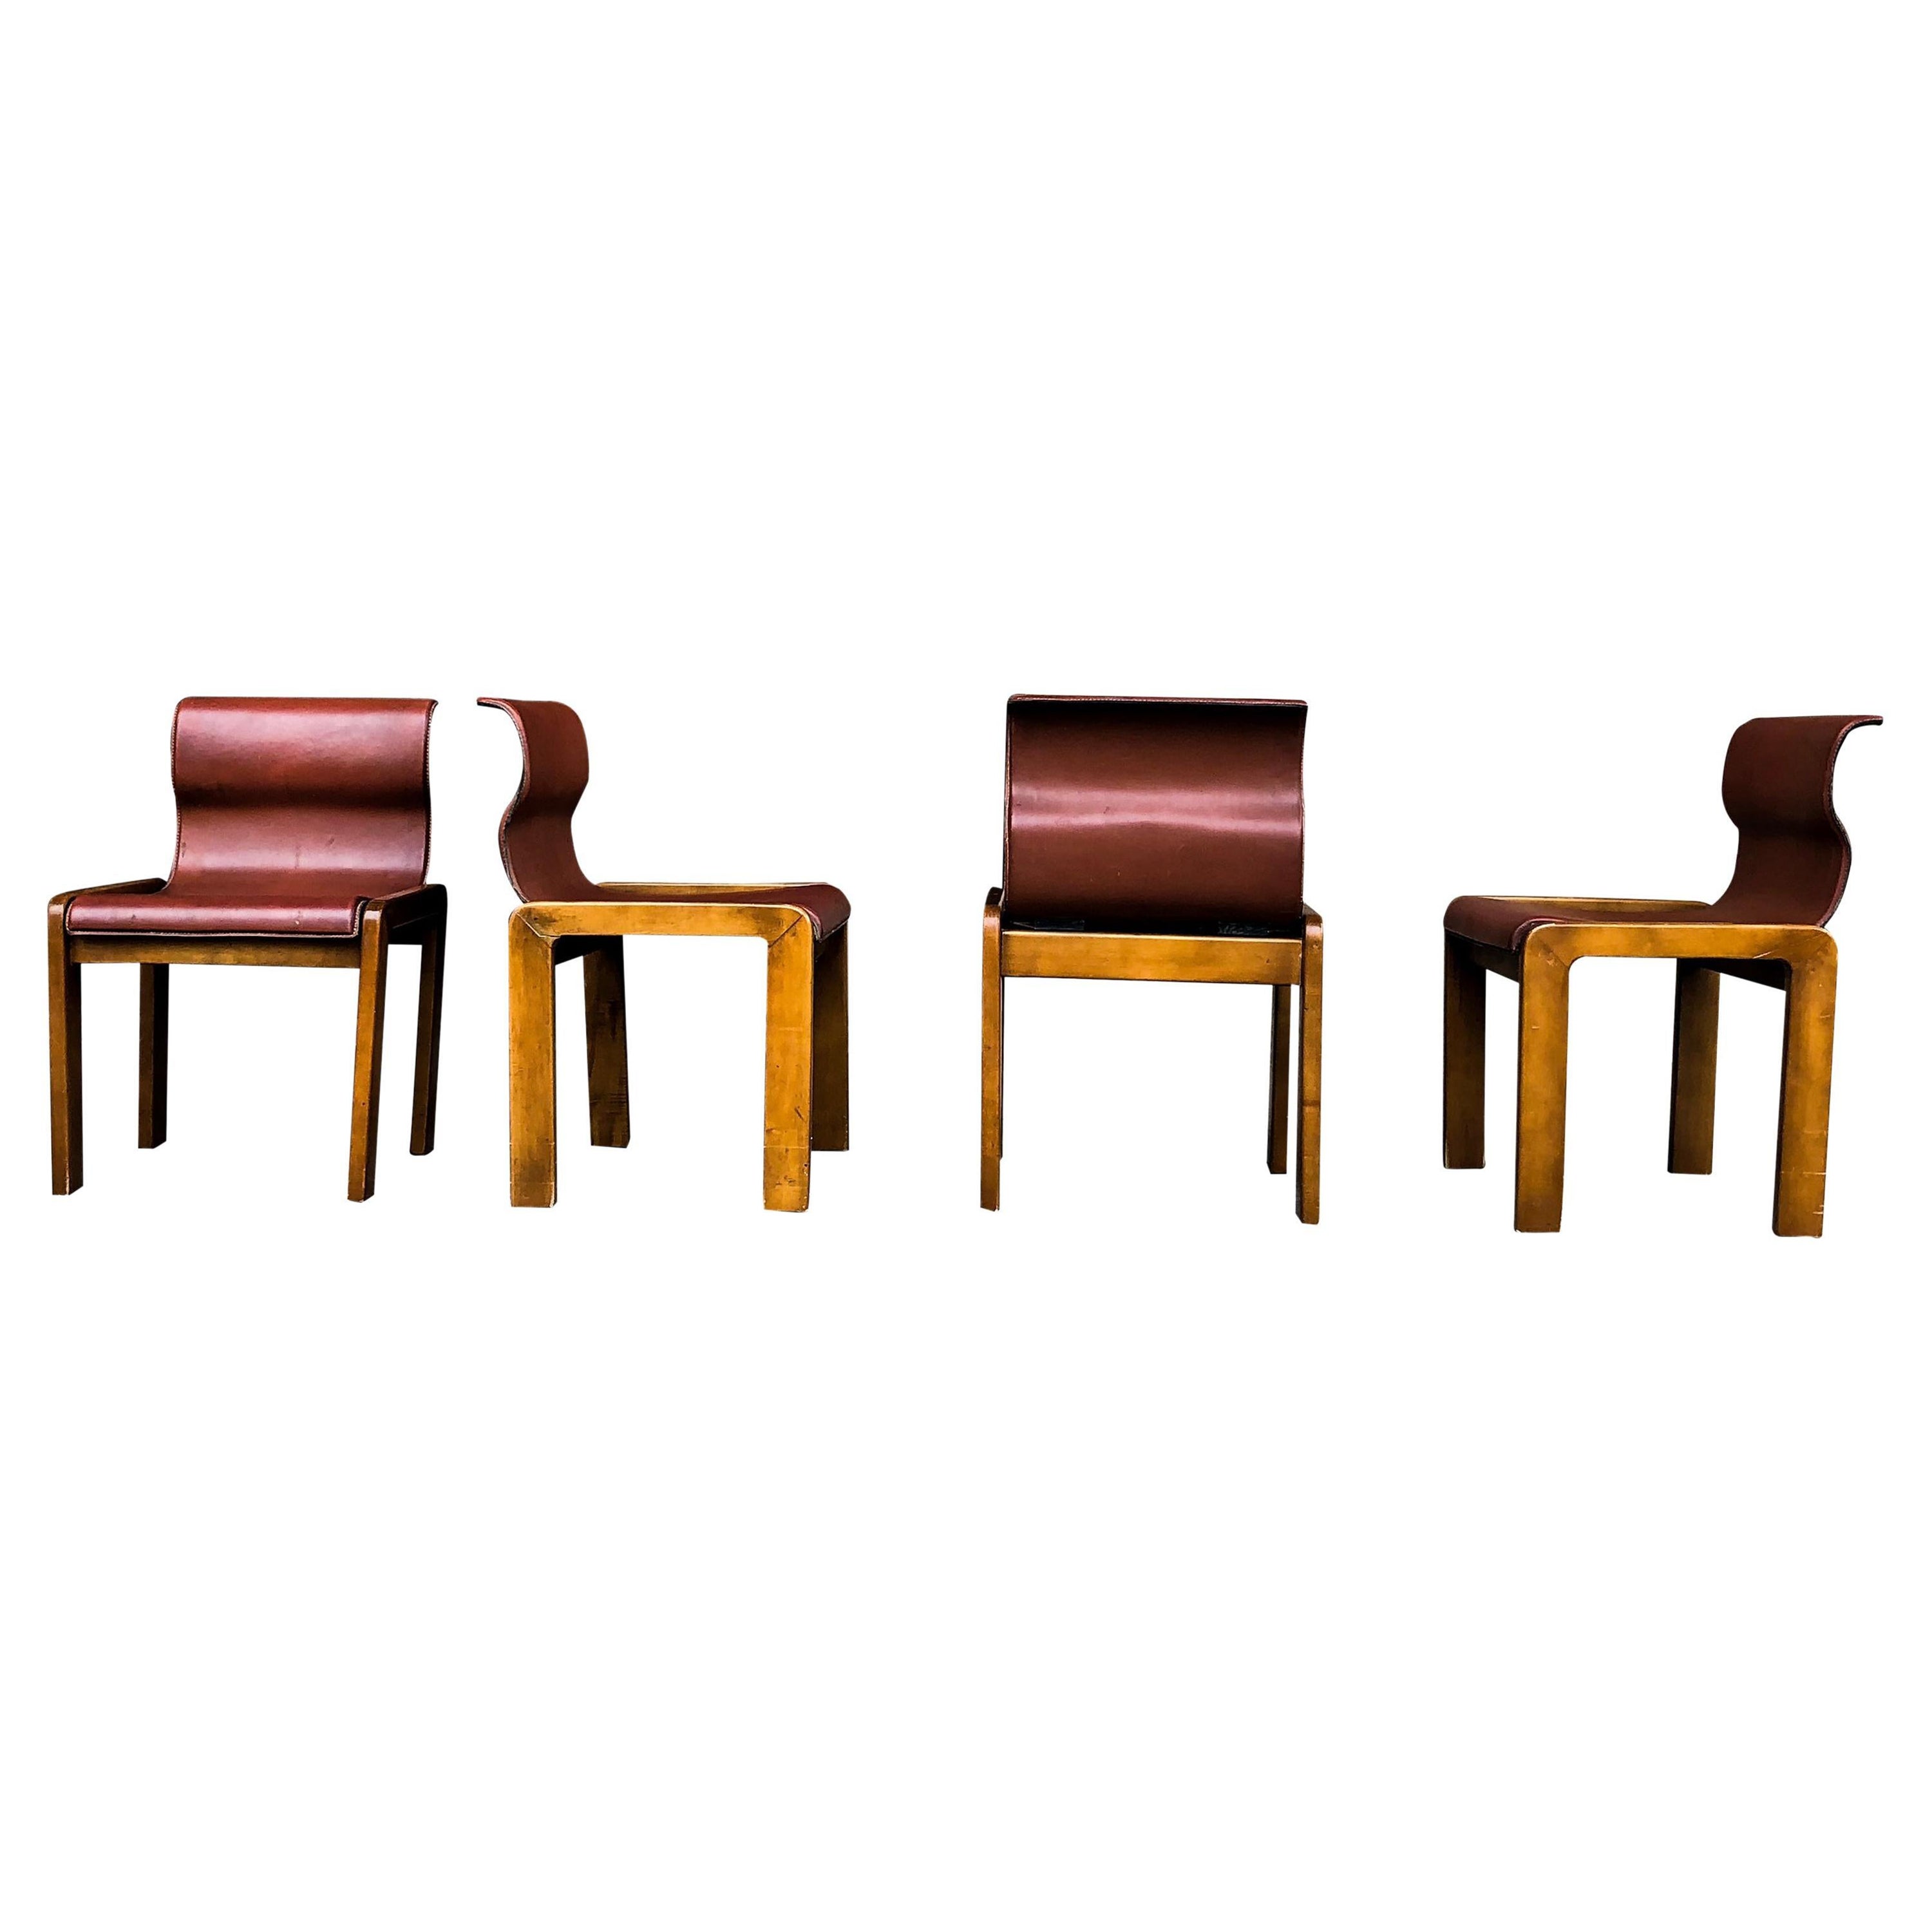 Afra & Tobia Scarpa Midcentury Leather and Plywood Dining Chair, 1966, Set of 4 For Sale